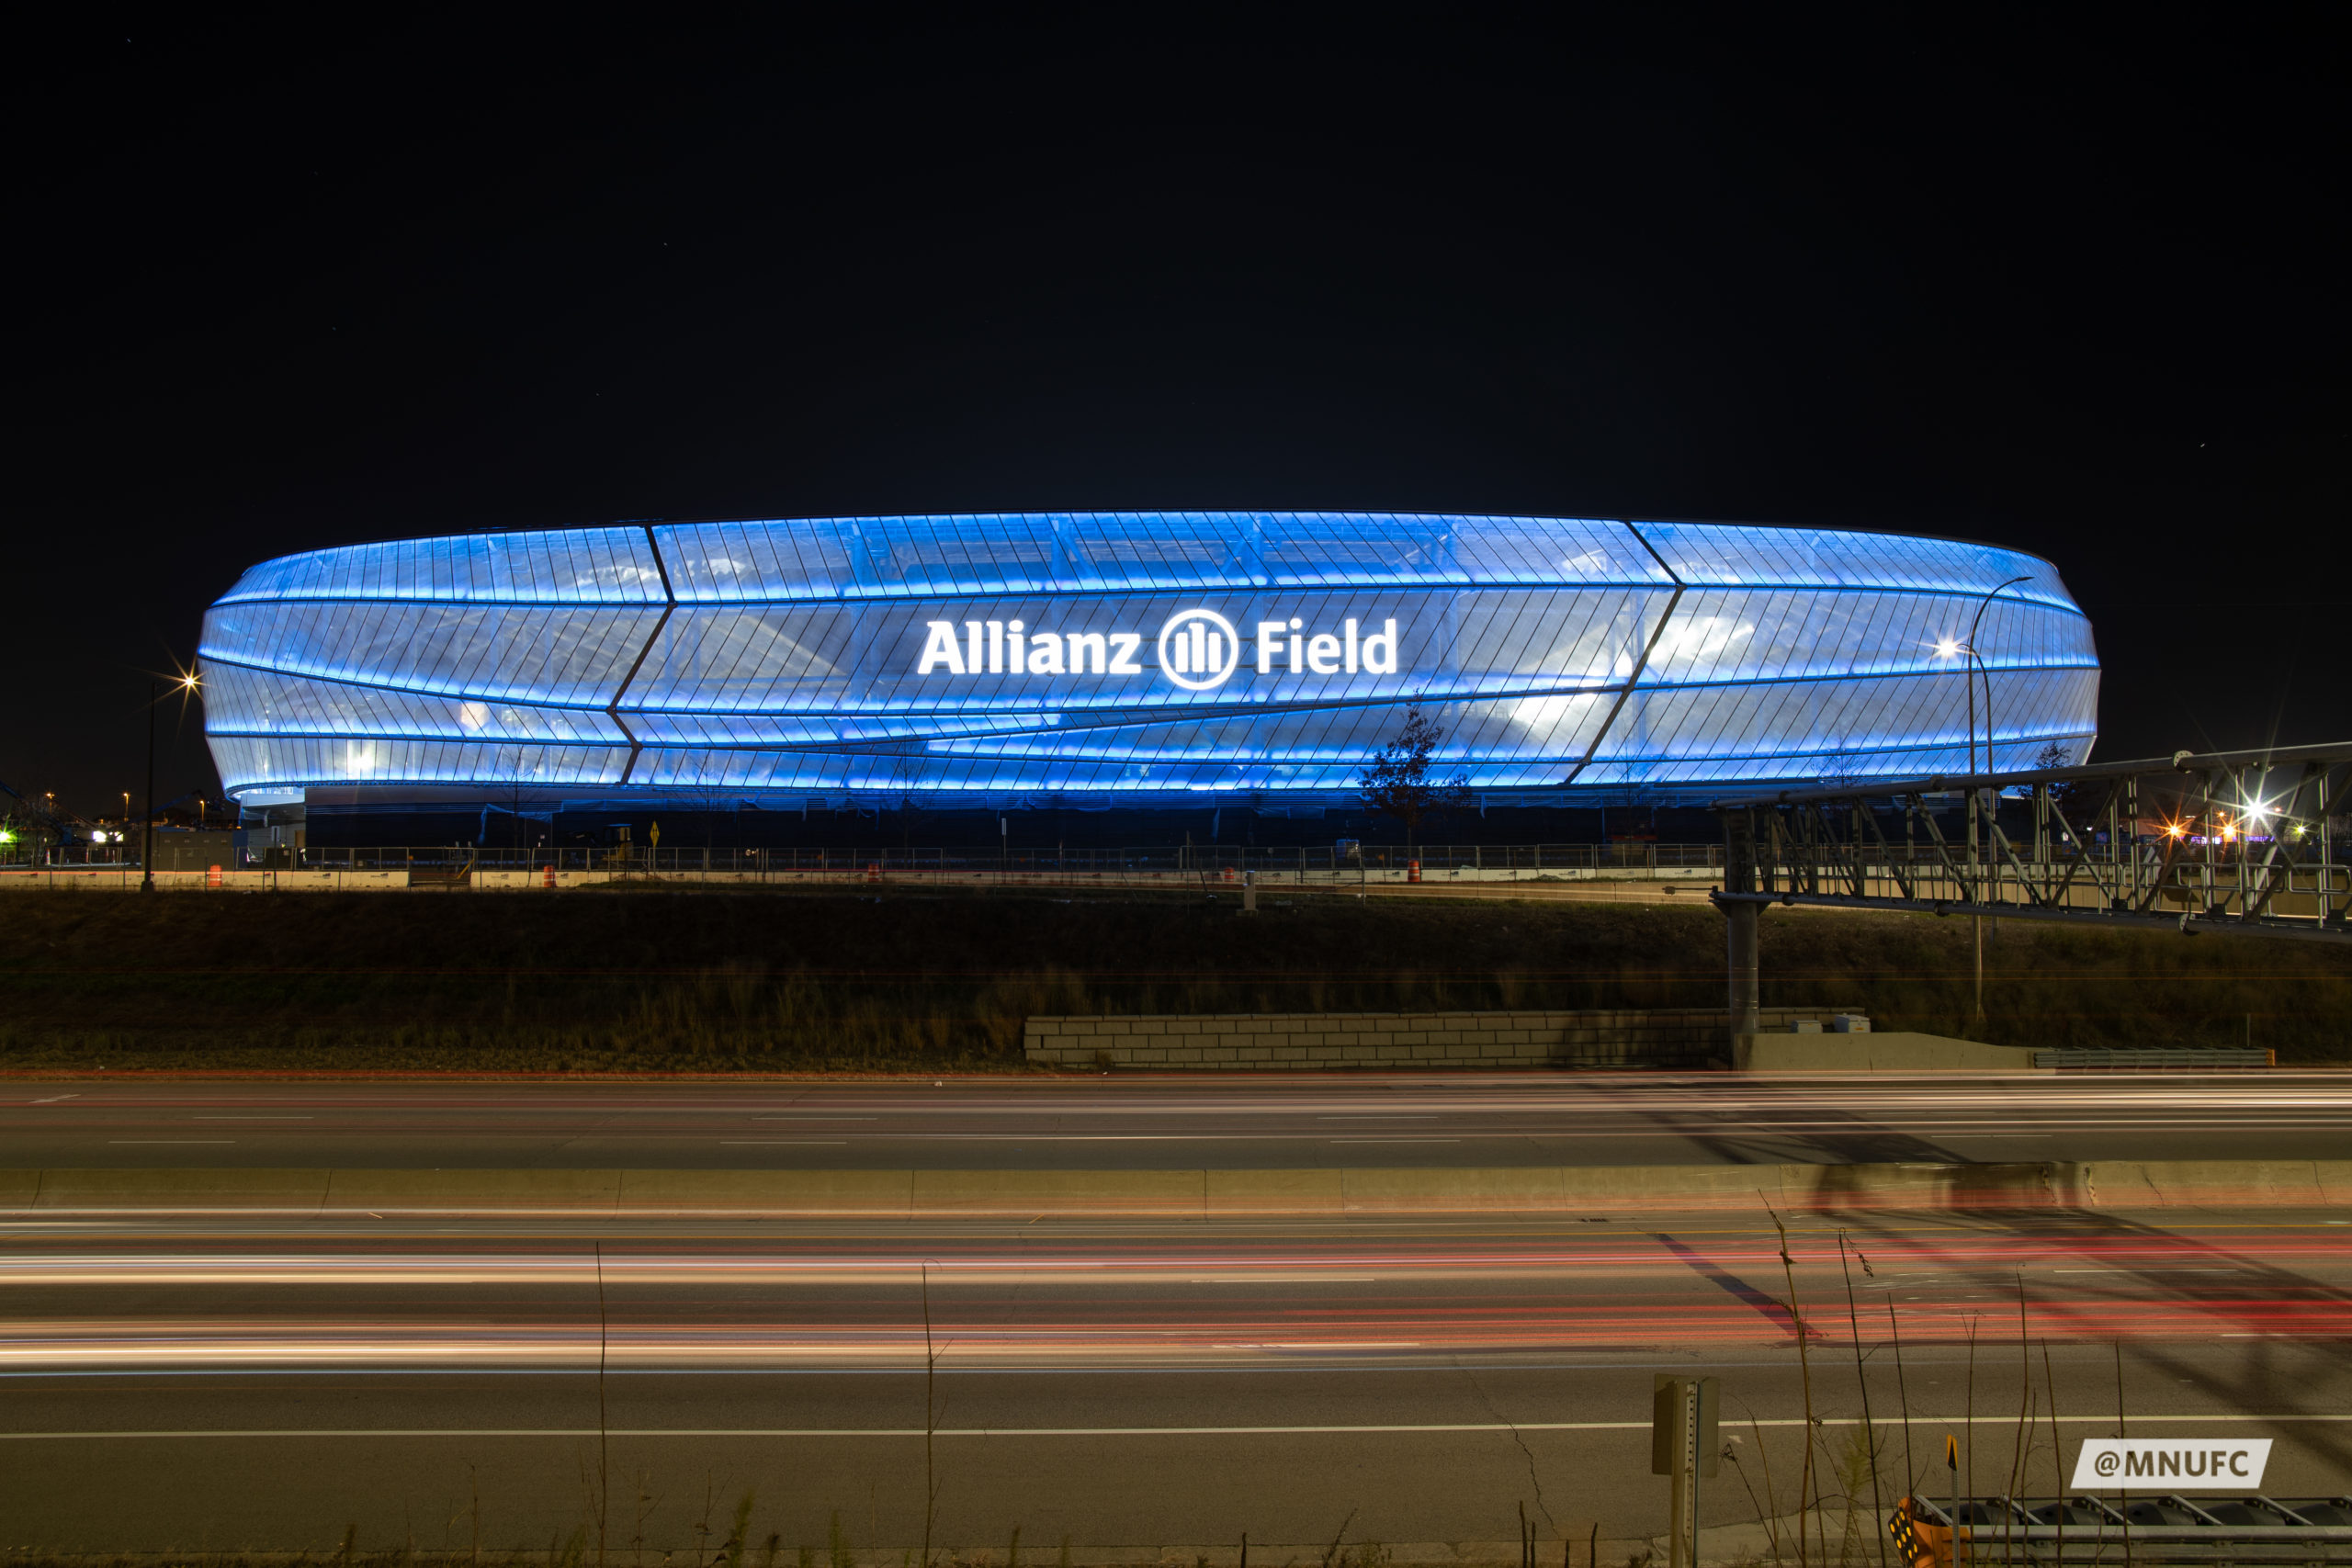 Allianz Field, home of the Minnesota United, shown lit up at night.